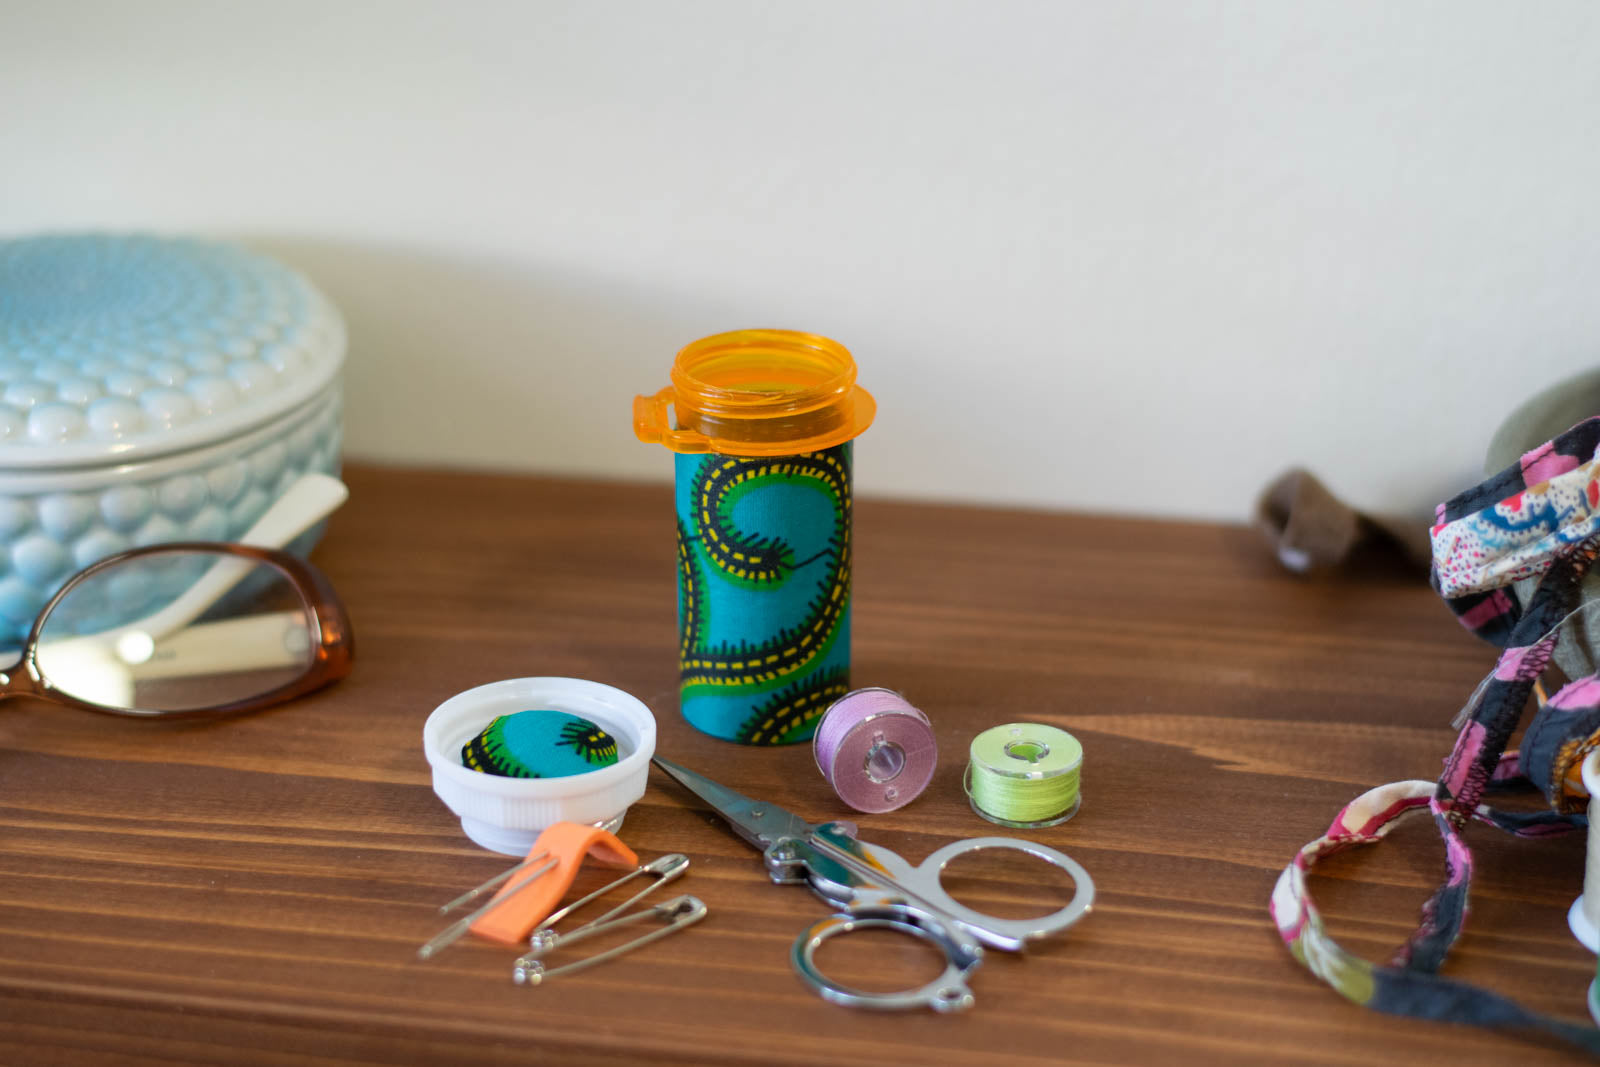 Upcycled Prescription Bottle Sewing Kit — Teal African Wax Print, 3.25" high, open with contents